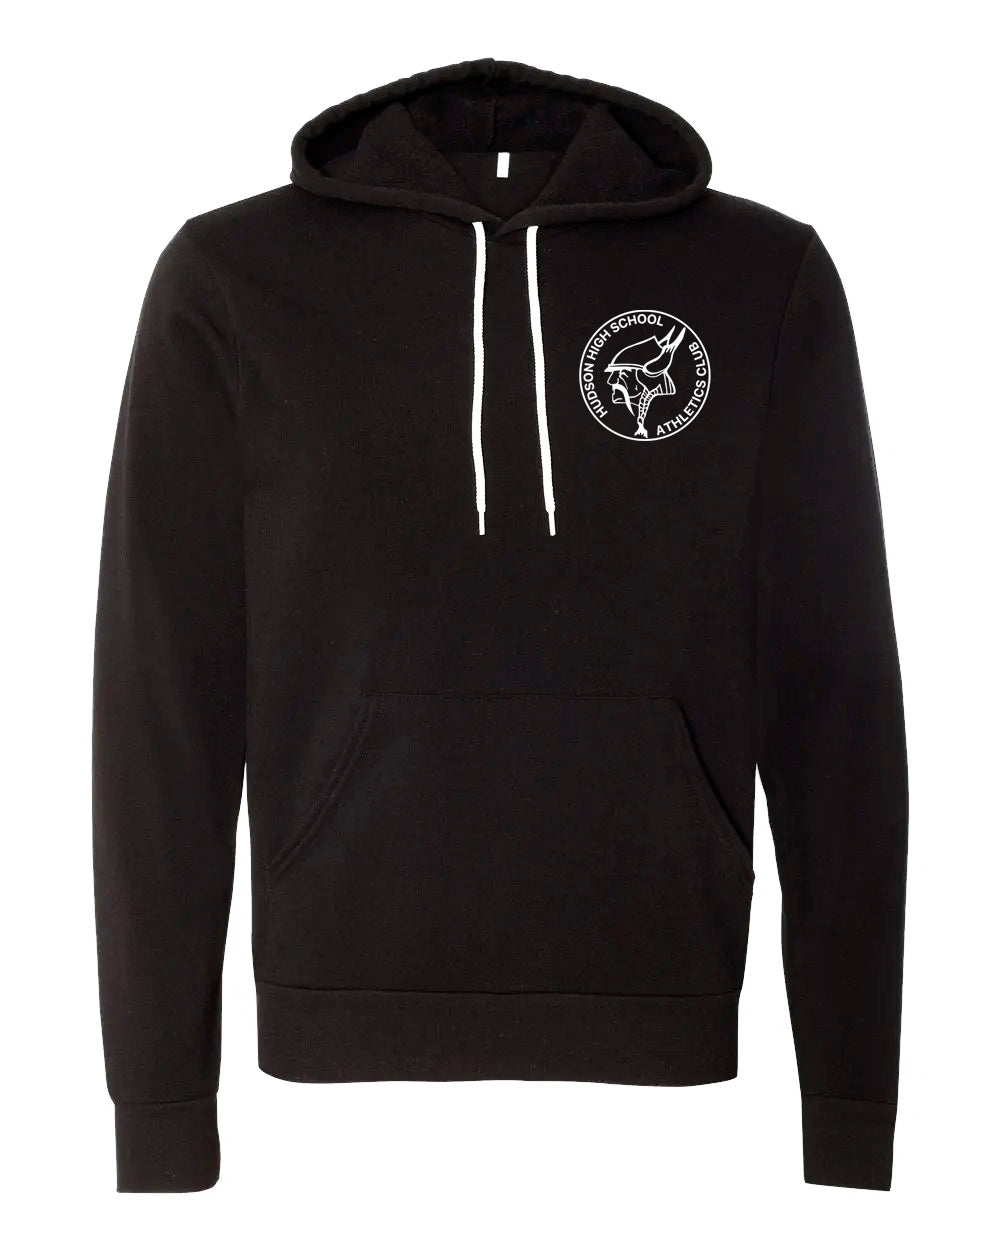 VINTAGE HHS ATHLETICS CLUB CREST Hoodies | Unsettled Apparel